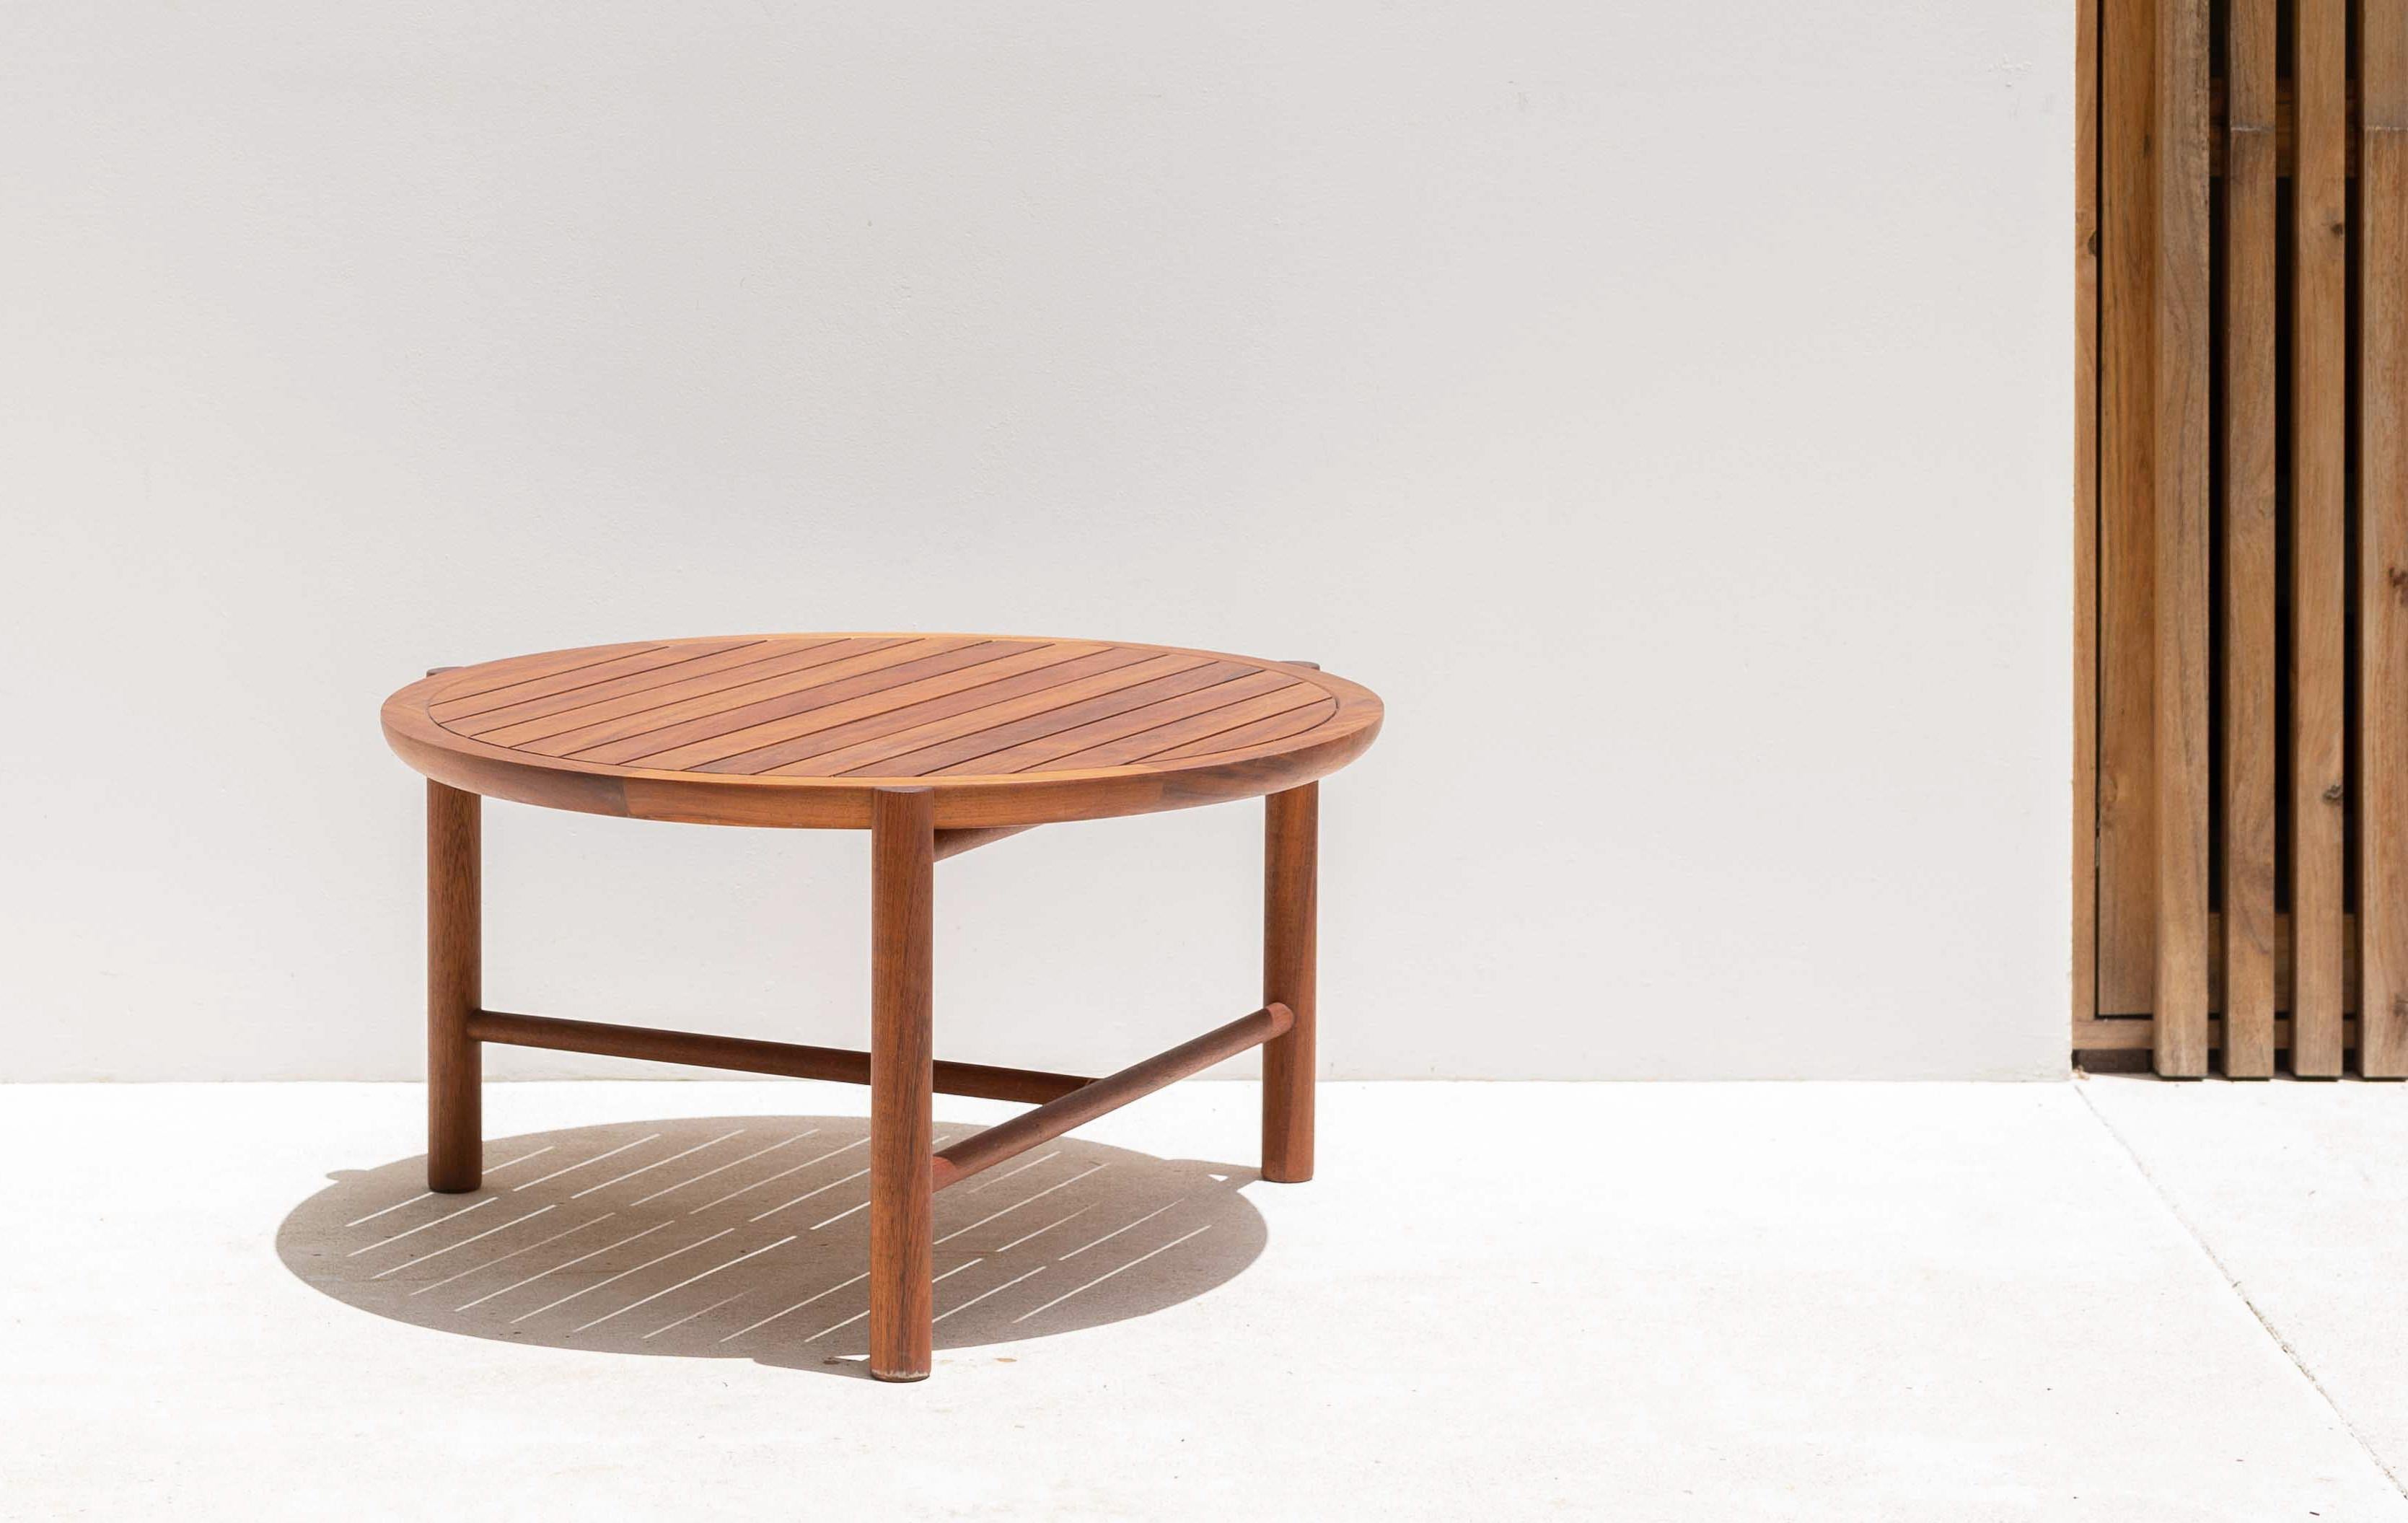 A coffee table collection for interior and exterior use that has a simple, honest and practical design. Its light, yet firm structure and detailed woodwork give each piece a sophisticated touch. Its structure accentuates the wood’s natural color and